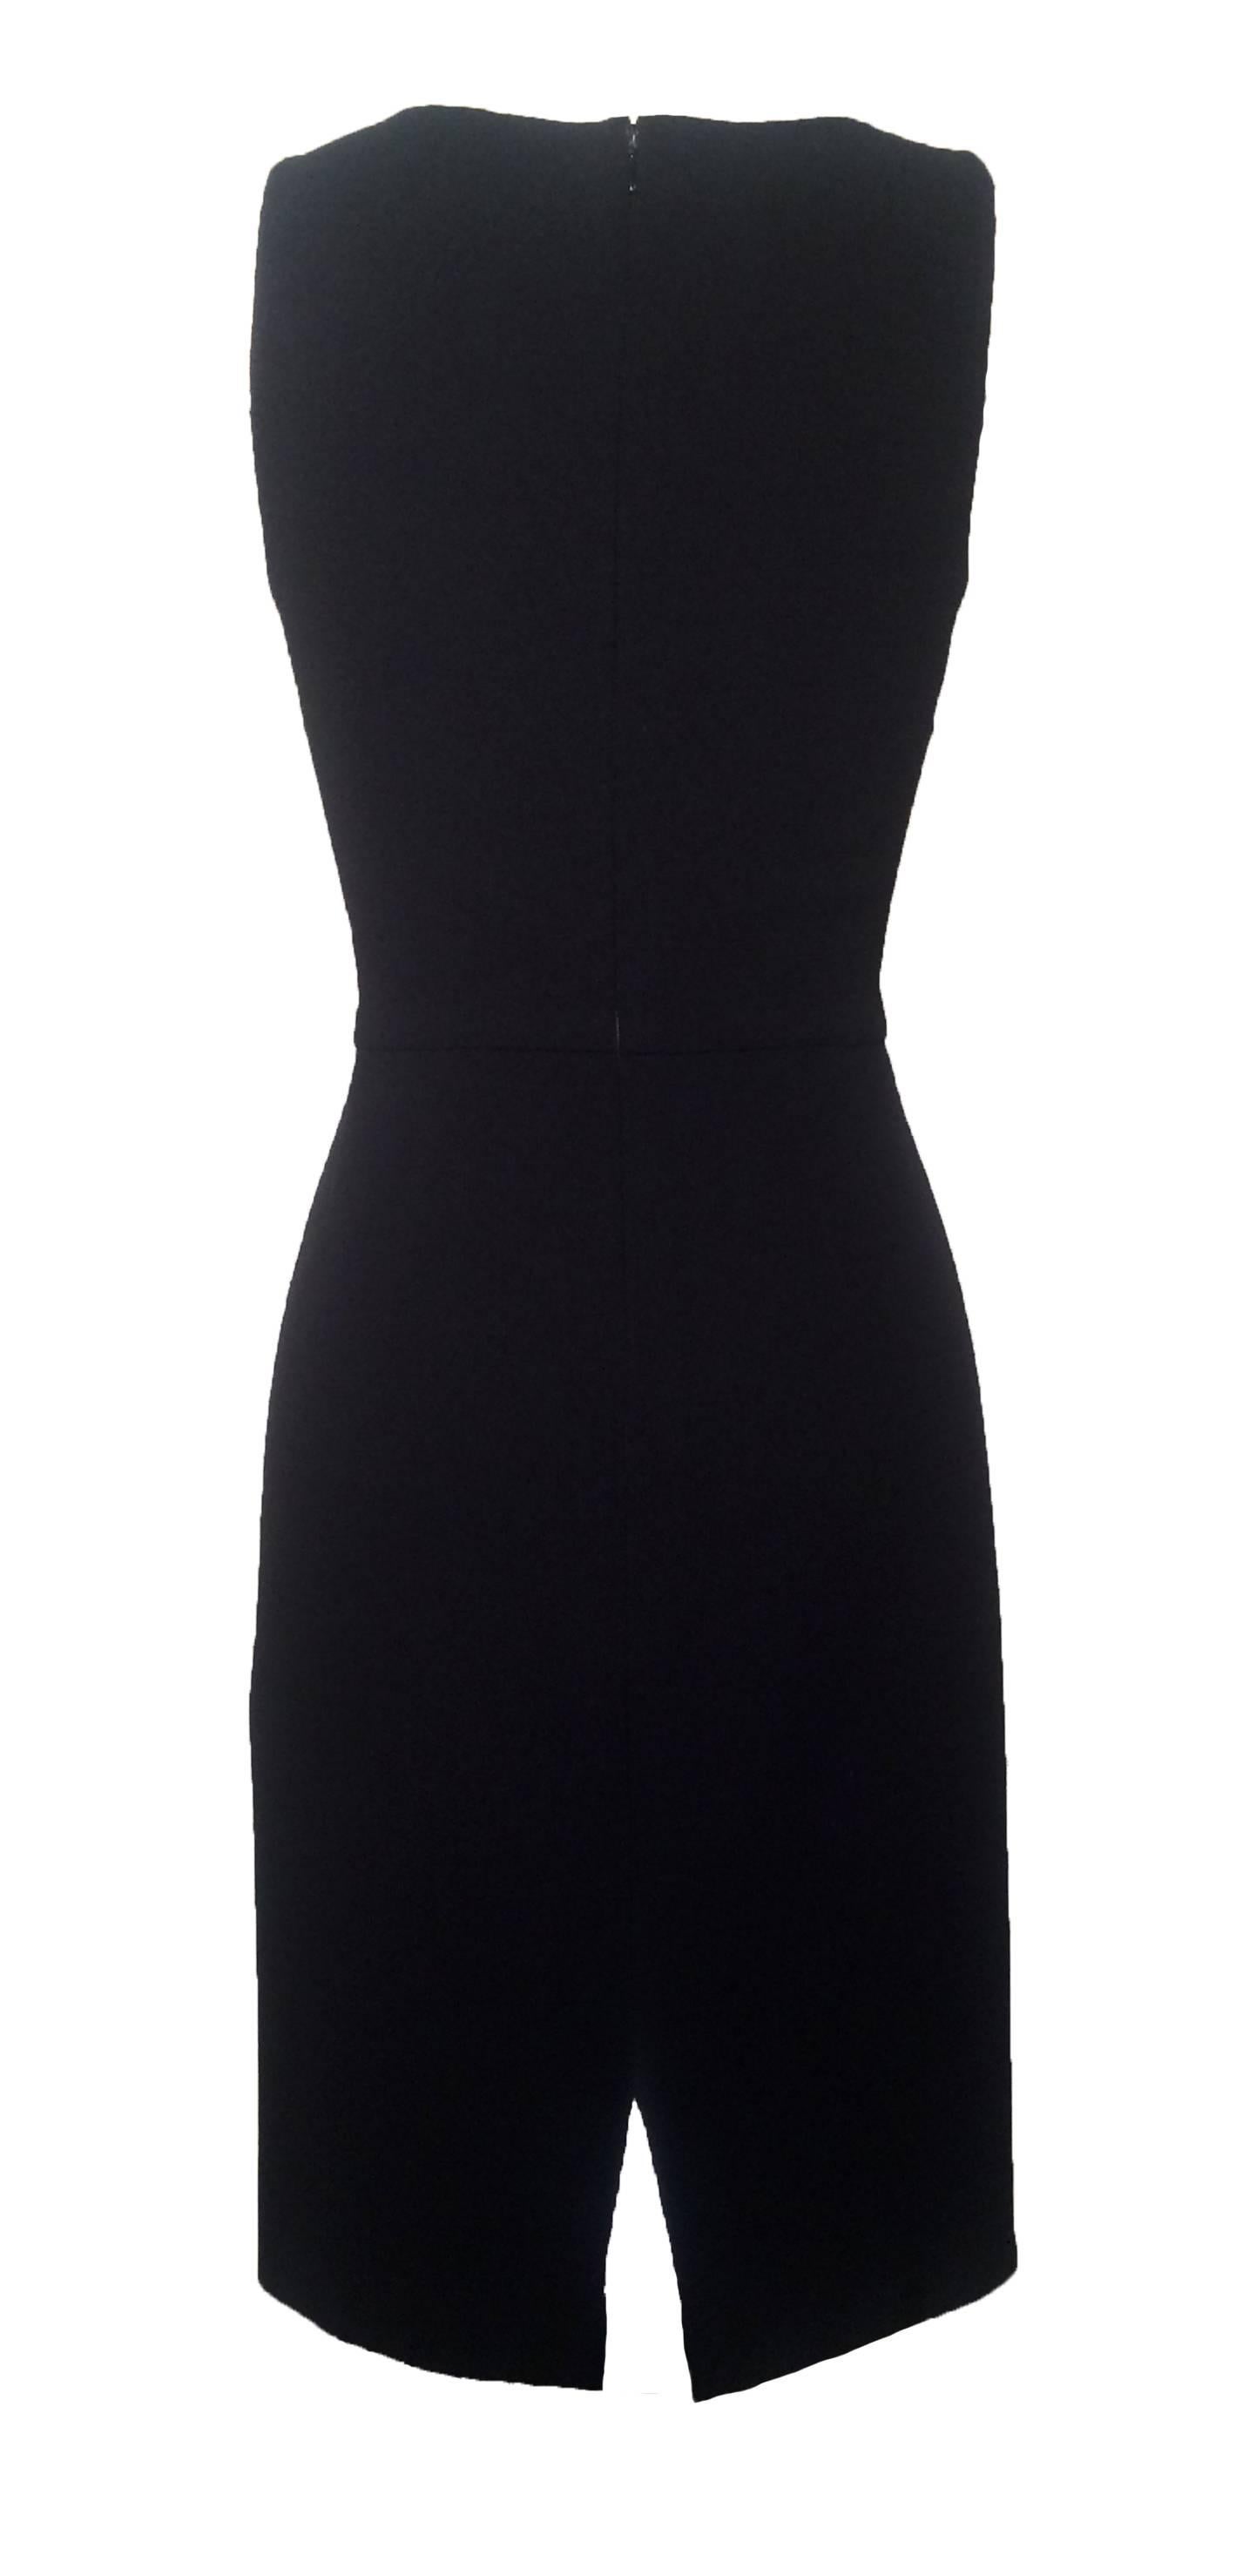 Oscar de la Renta little black dress. Twist detail forms a cut out at chest. Sleeveless, slight pleating at waist.

Back zip and hook and eye closure.

Labelled size 0. See measurements.
Bust 31